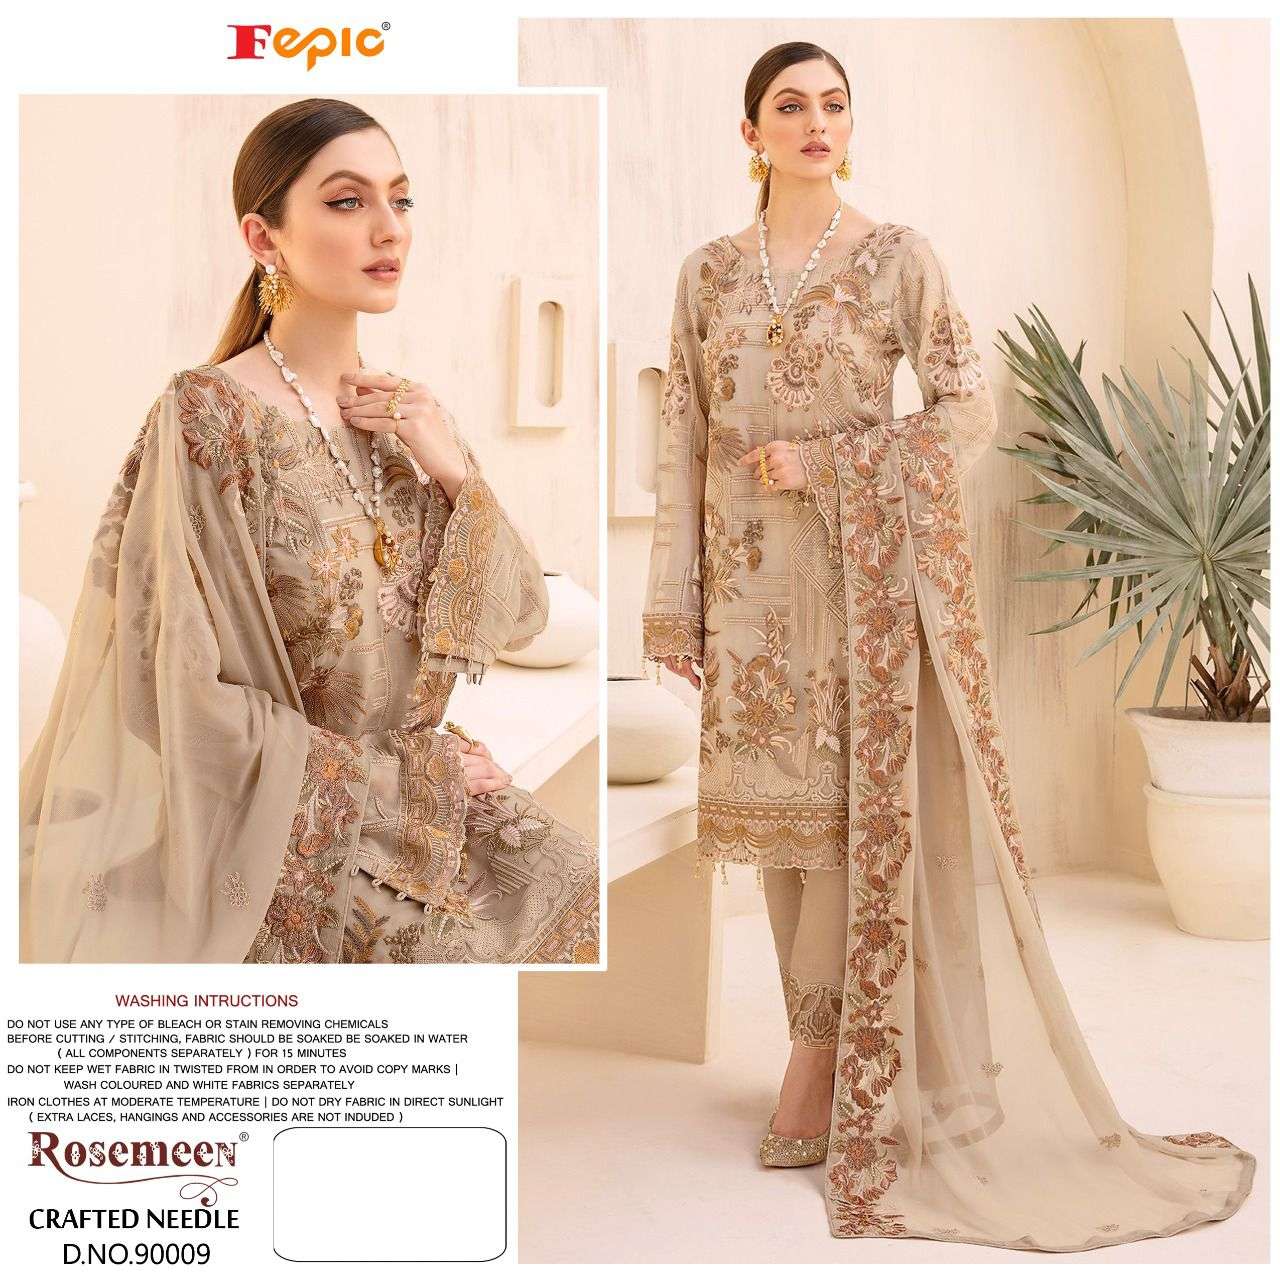 FEPIC ROSEMEEN PRESENTS CRAFTED NEEDLE GEORGETTE WHOLESALE PAKISATANI SUITS